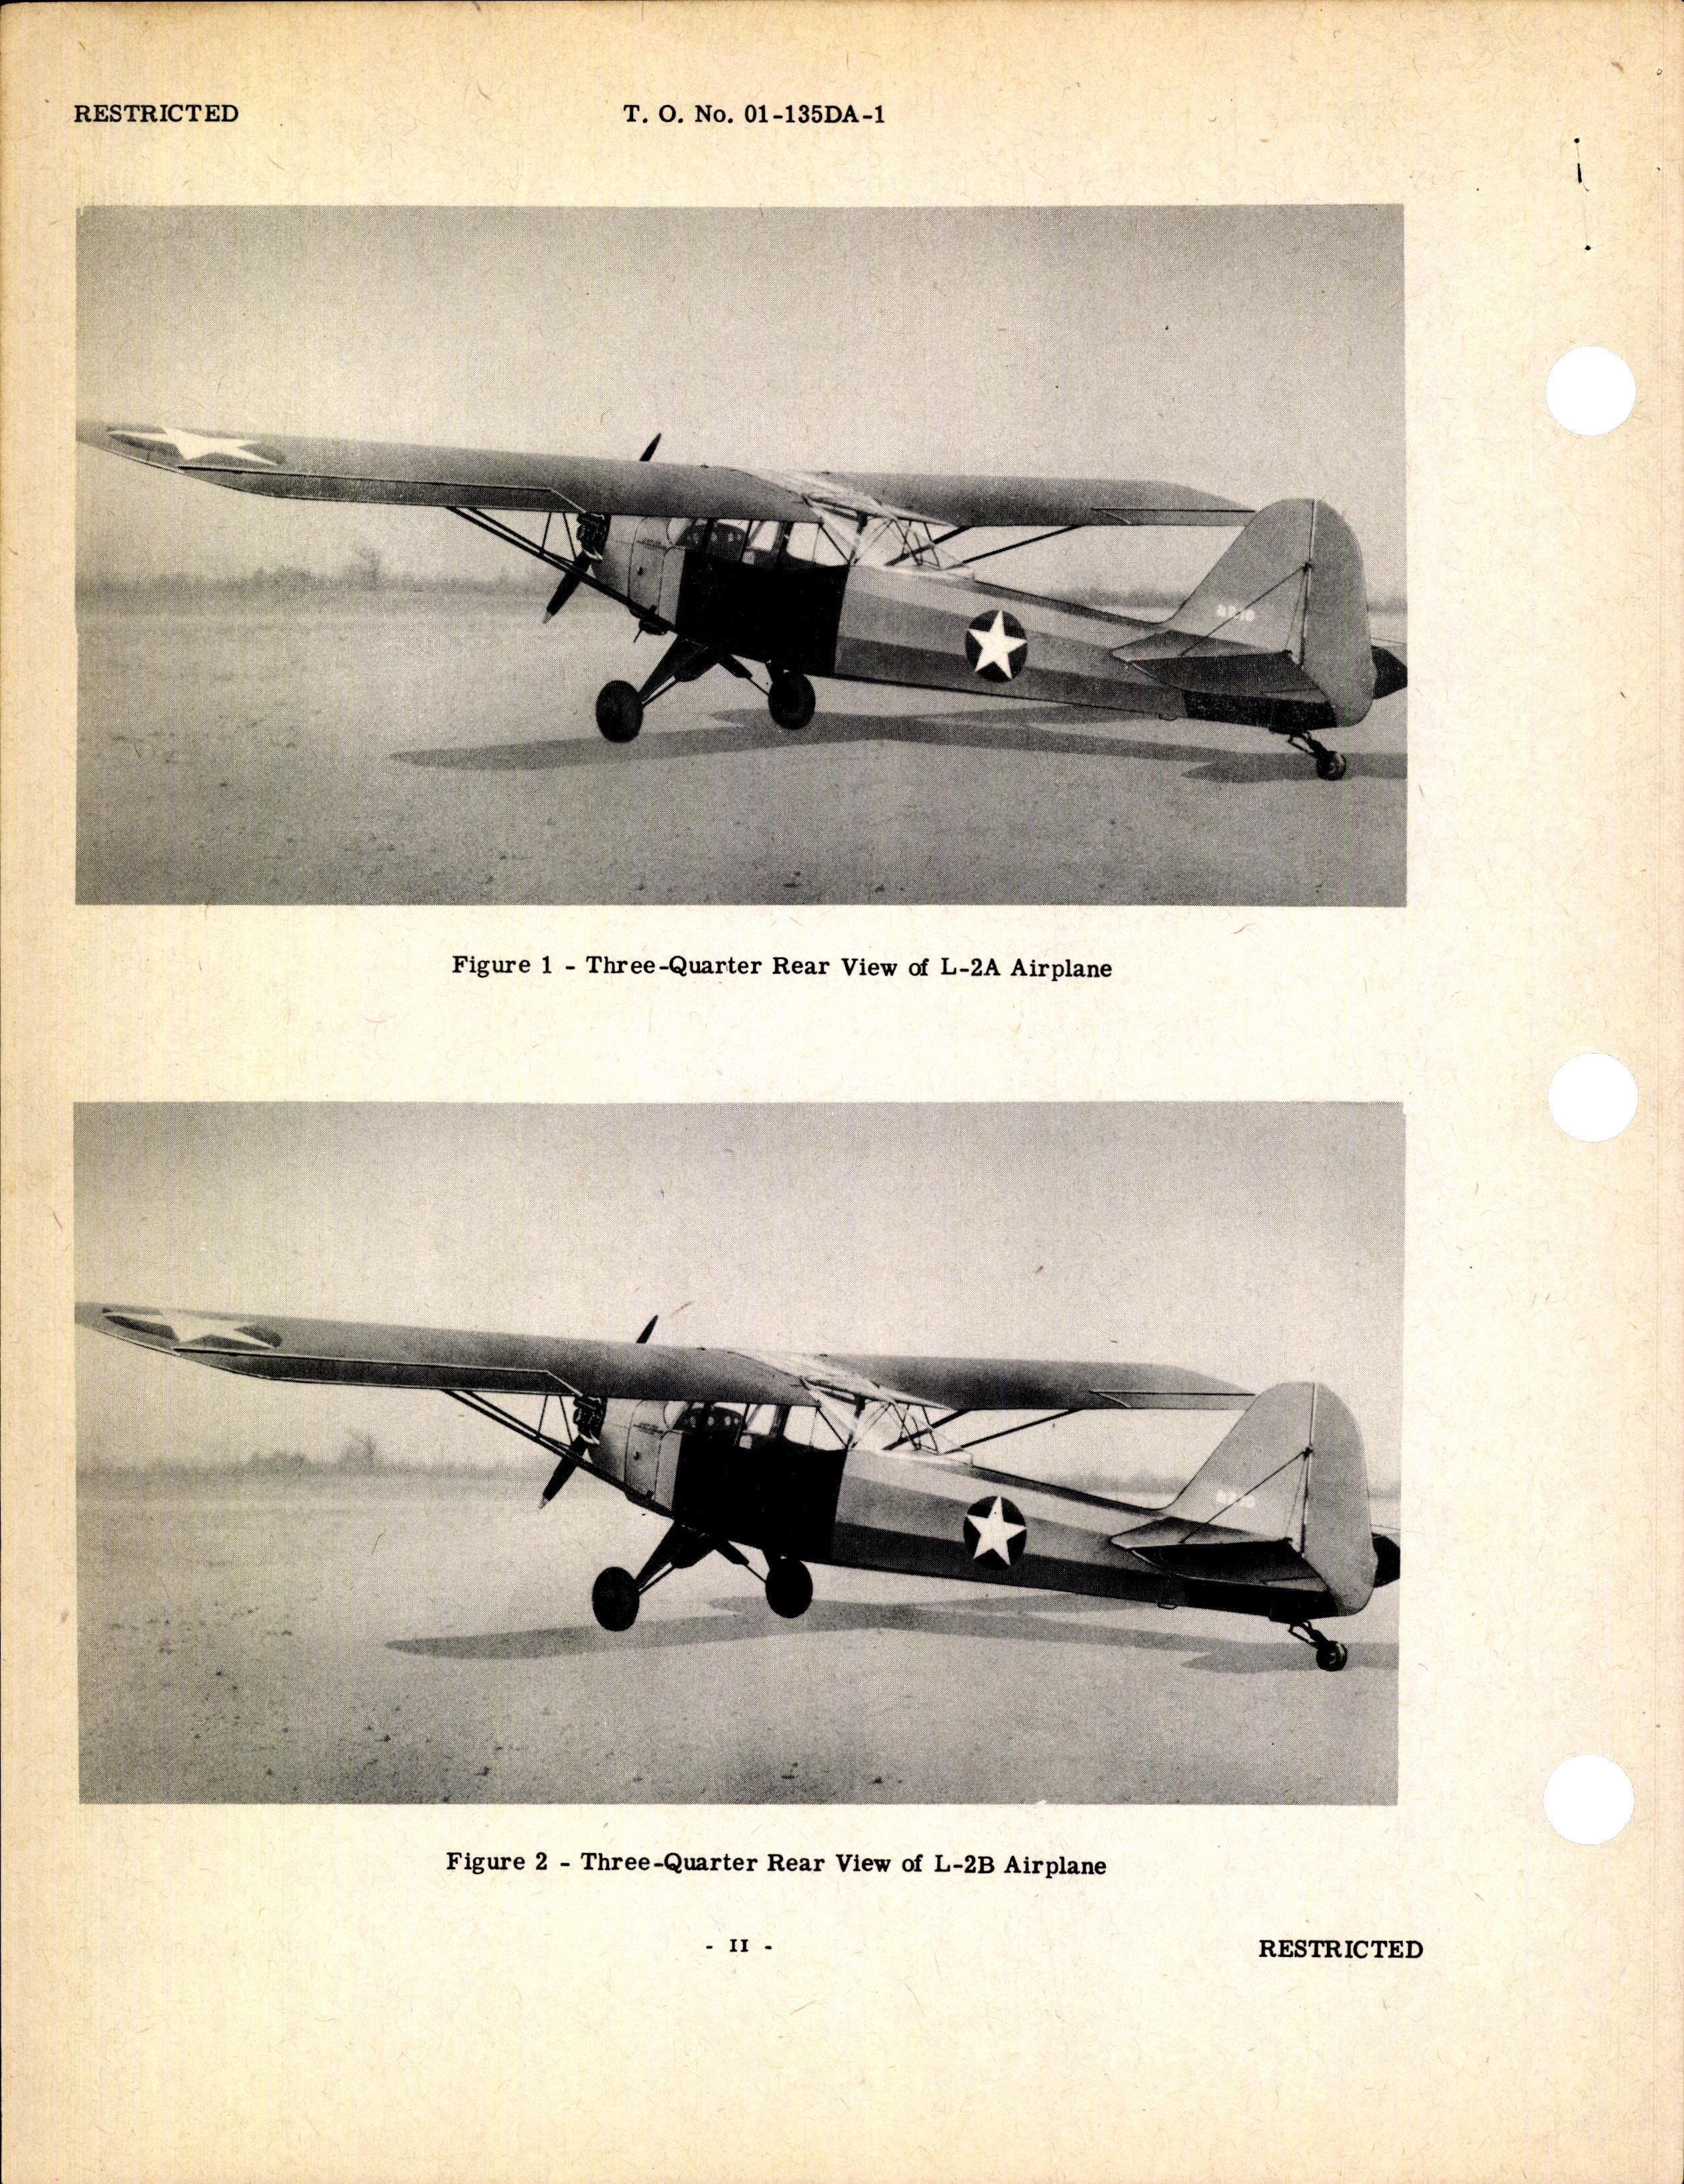 Sample page 4 from AirCorps Library document: Pilot's Flight Operating Instructions for L-2, L-2A & L-2B Airplanes